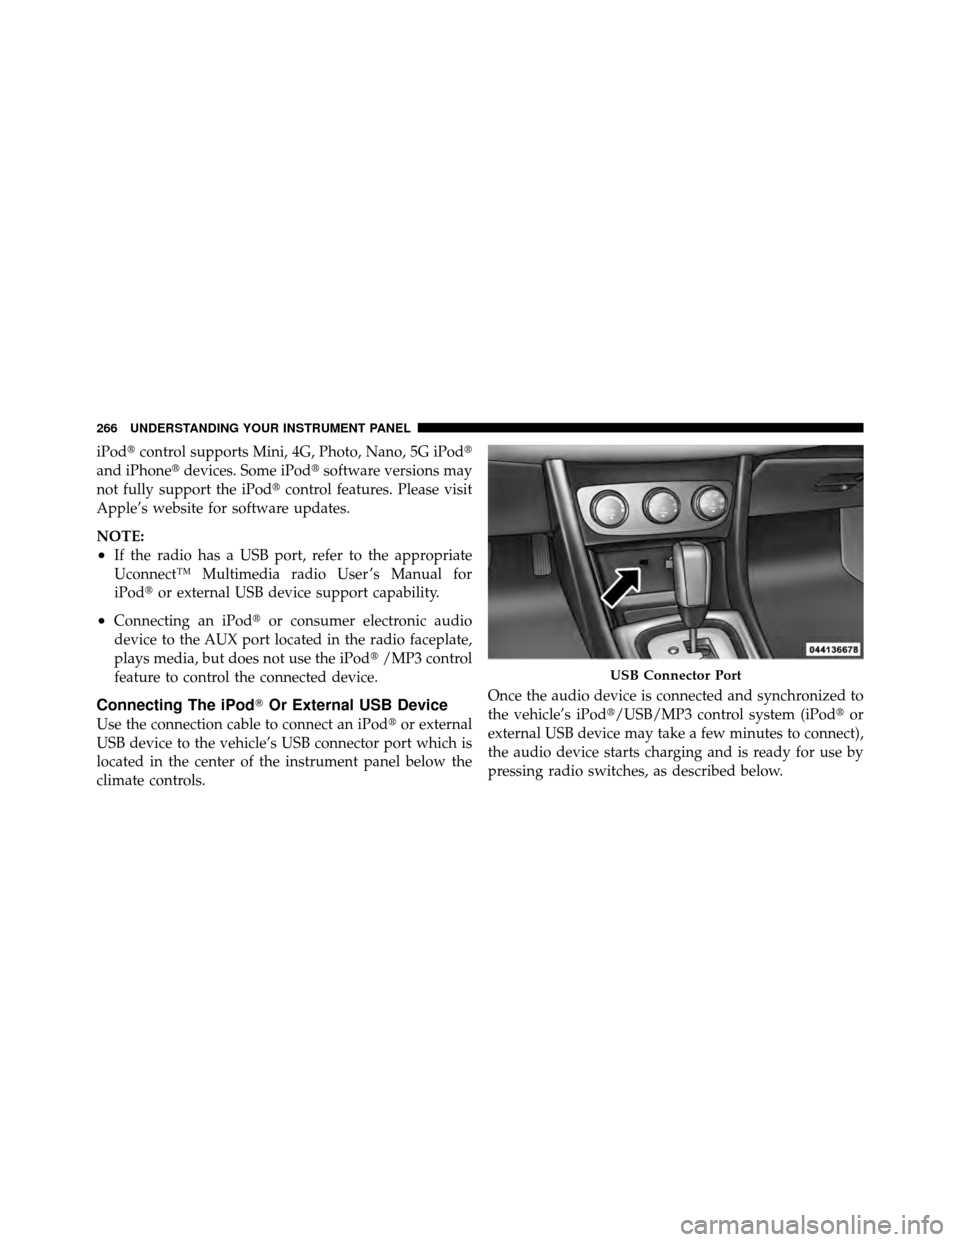 CHRYSLER 200 2012 1.G Owners Manual iPodcontrol supports Mini, 4G, Photo, Nano, 5G iPod
and iPhone devices. Some iPod software versions may
not fully support the iPod control features. Please visit
Apple’s website for software up